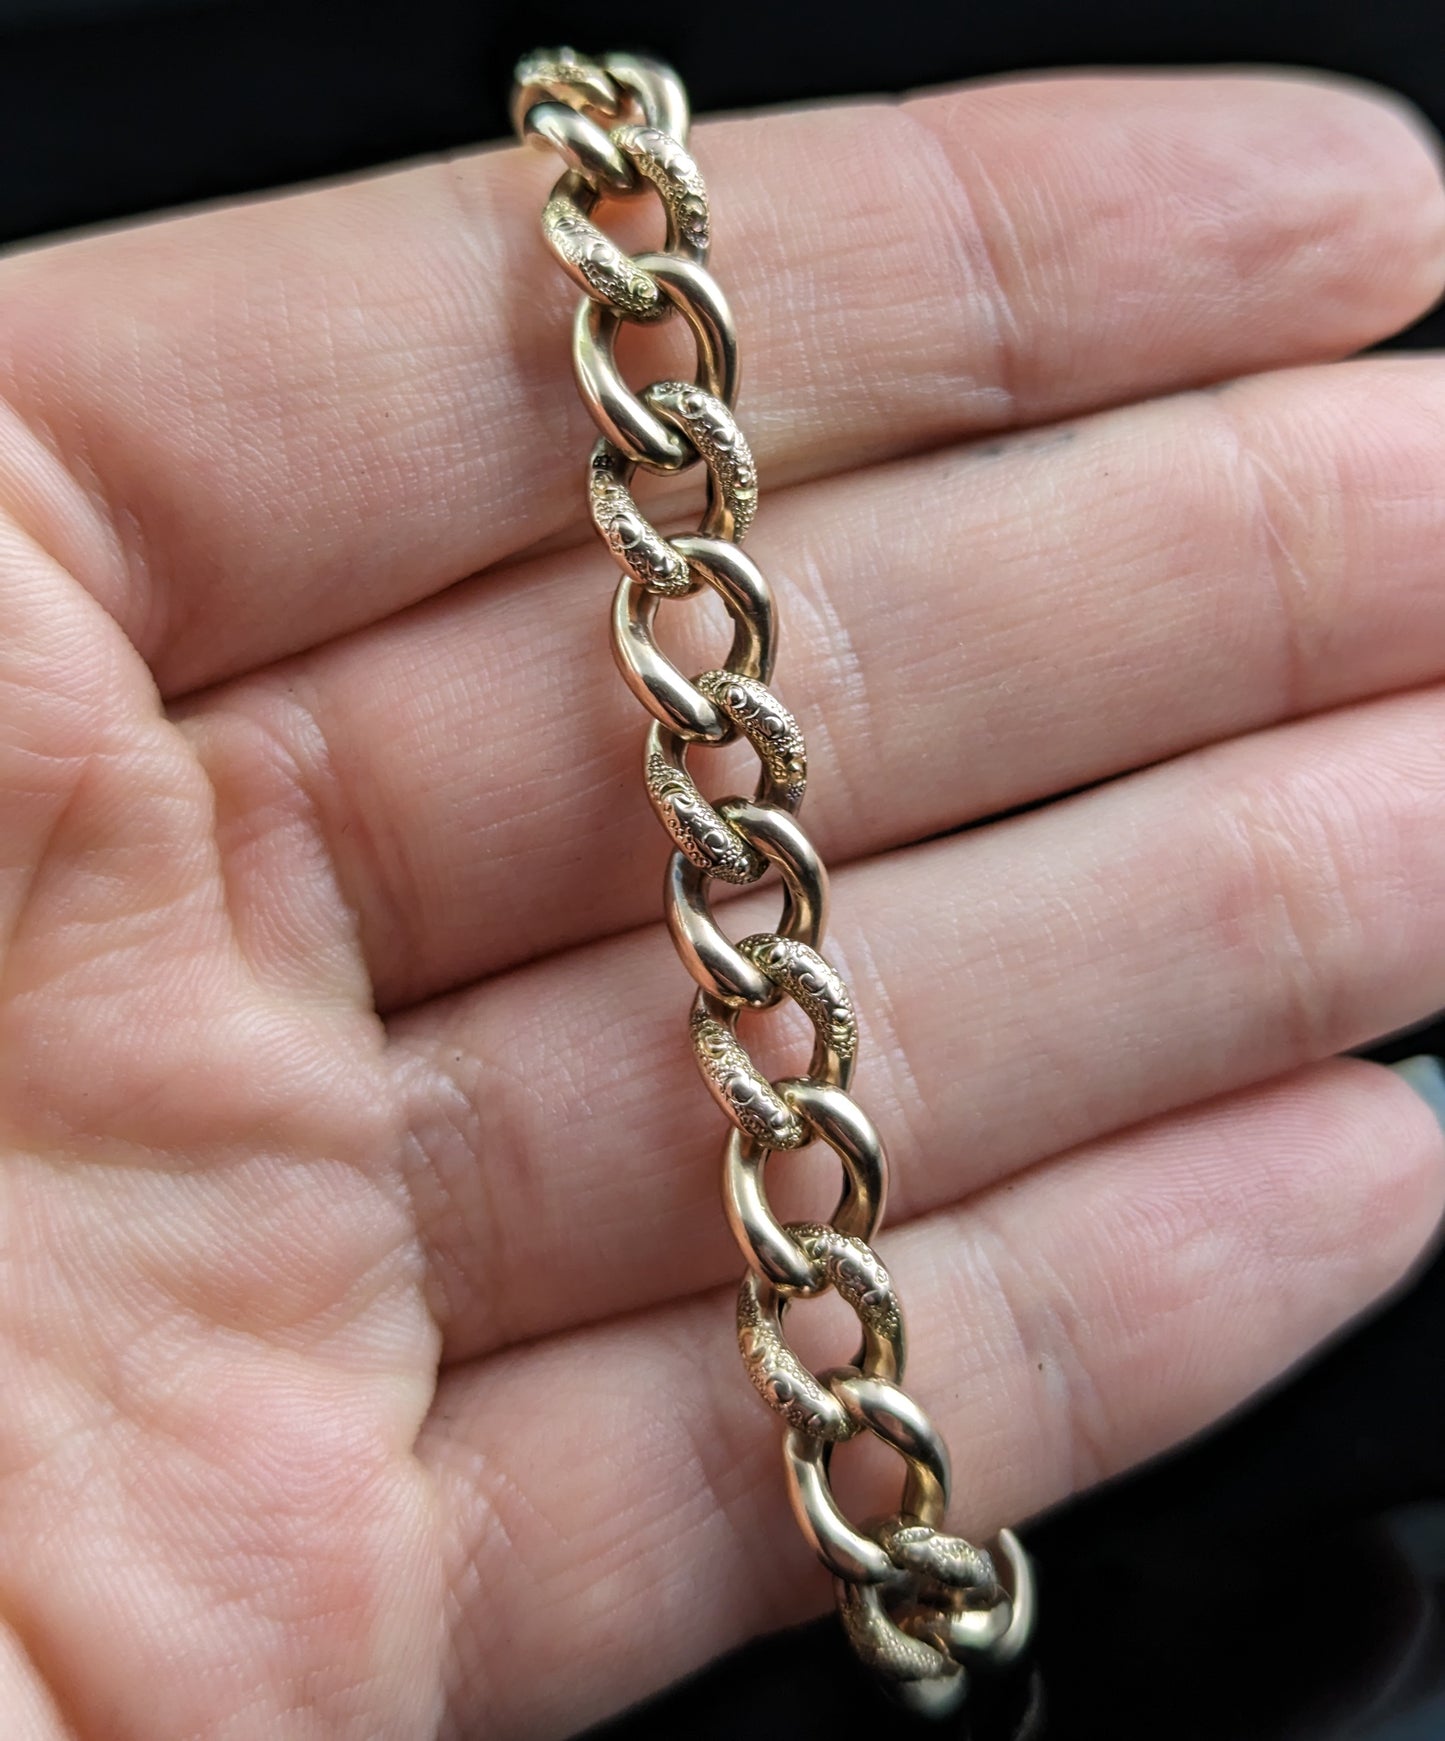 Antique 9ct gold curb link bracelet, Edwardian, Day to night